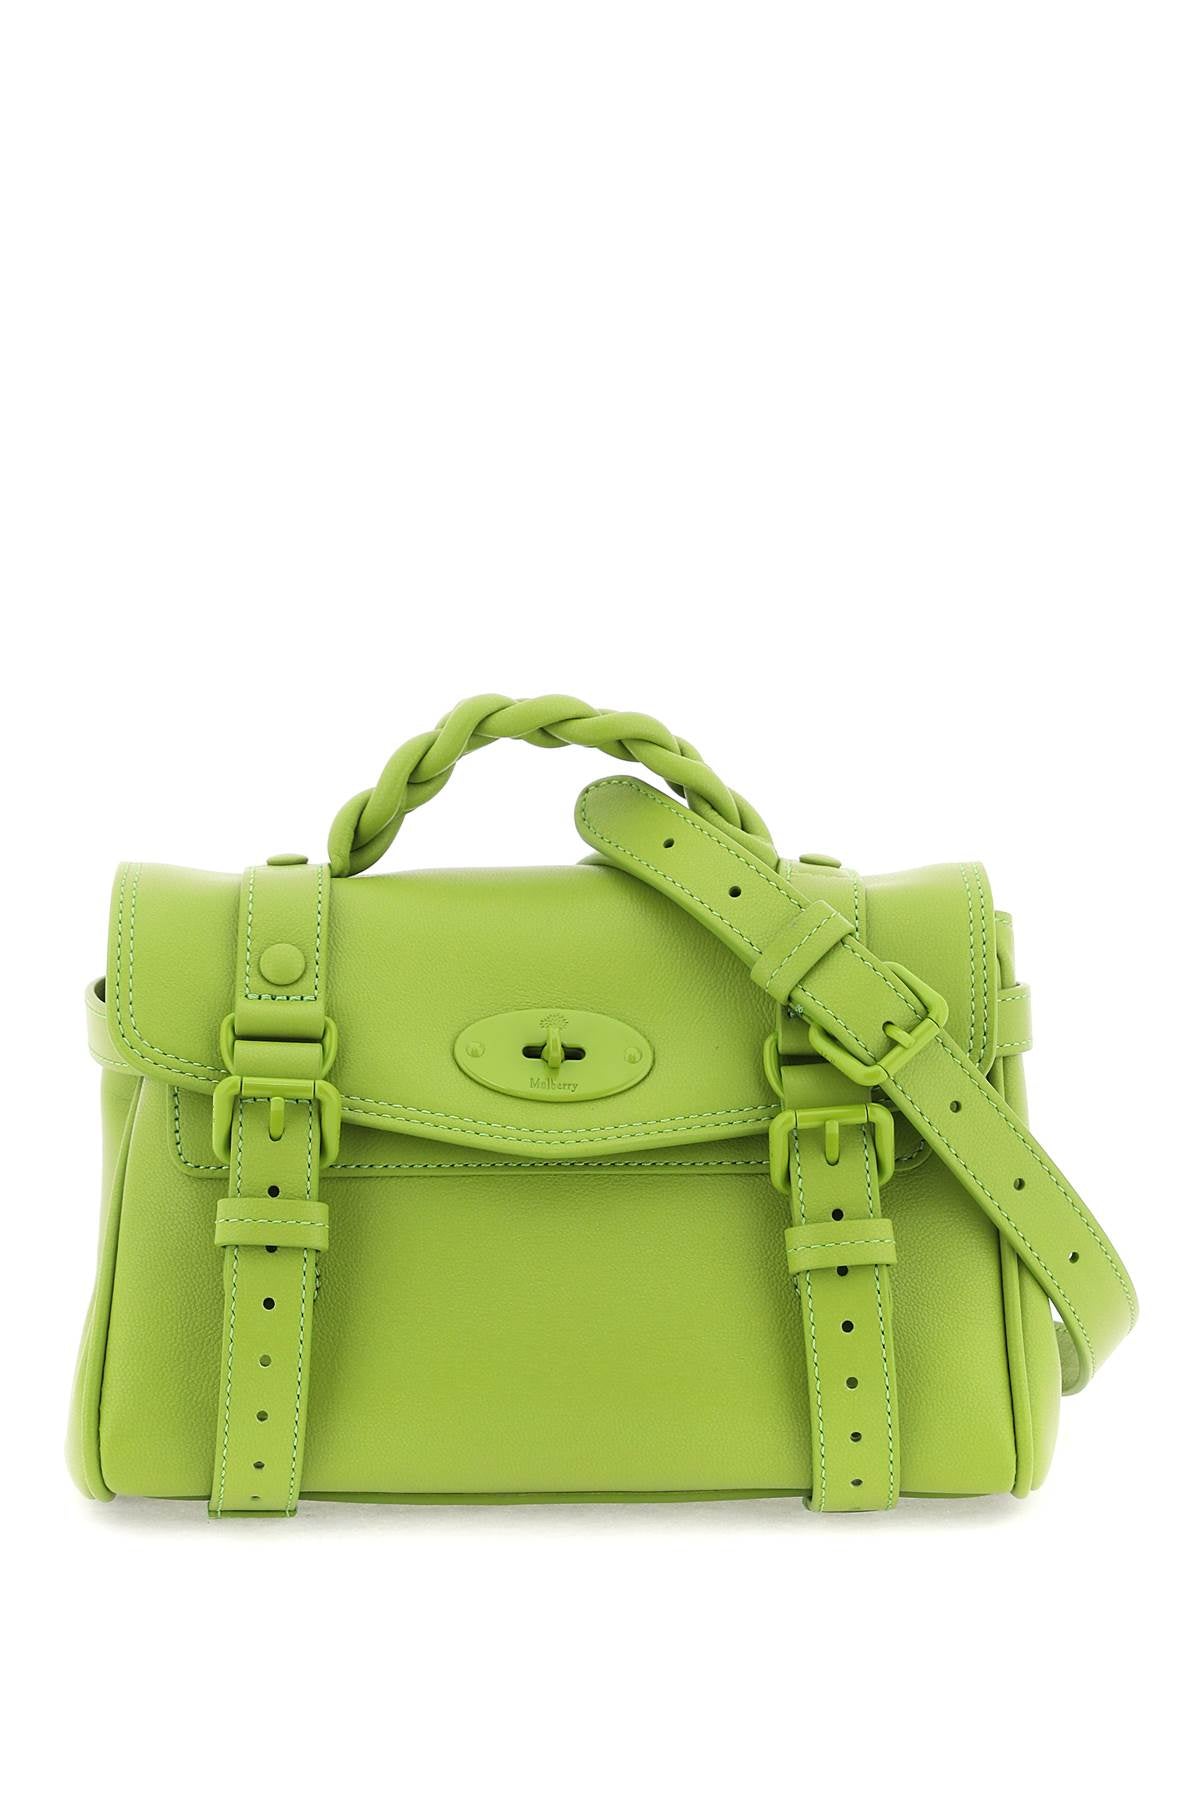 Shop Mulberry Green Mini Leather Handbag With Iconic Twist Closure And Detachable Strap